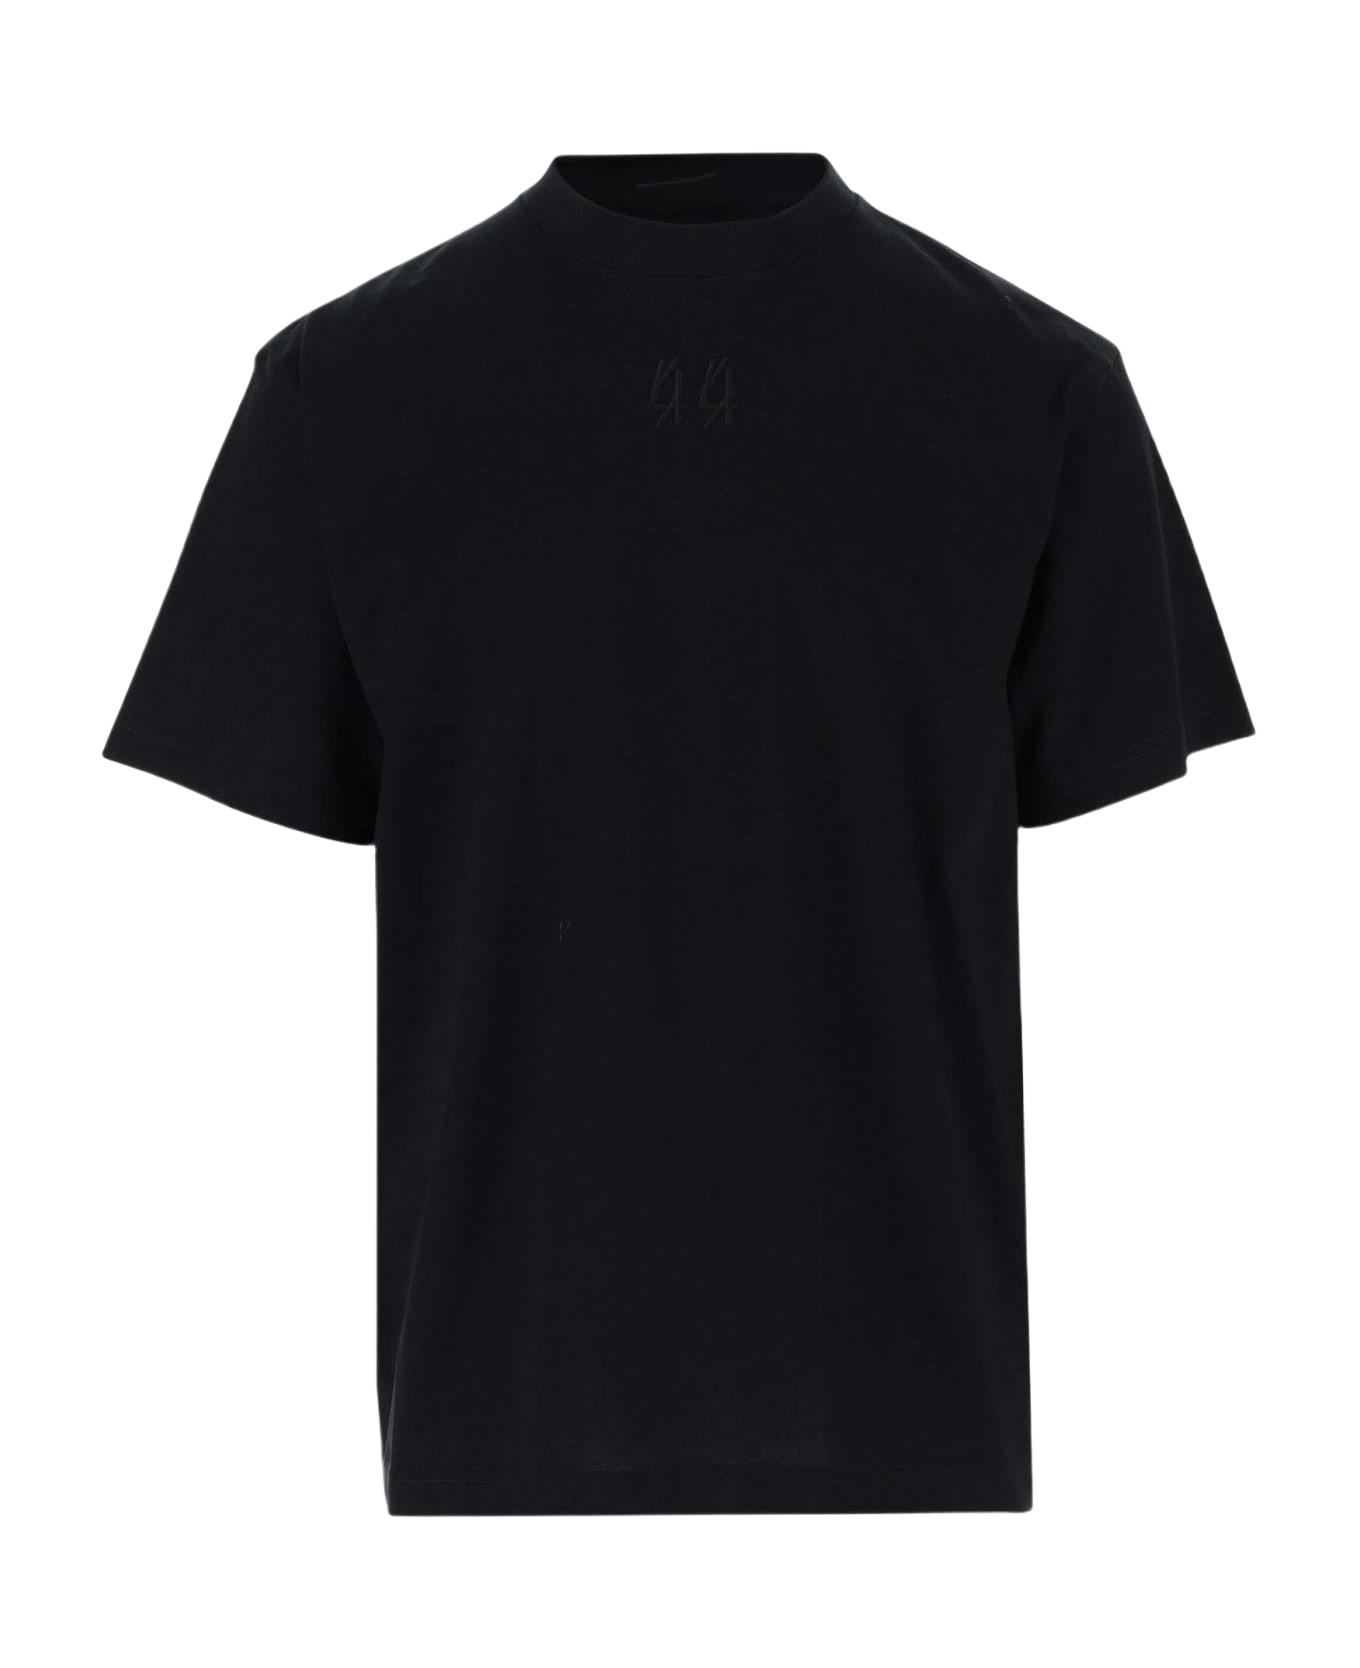 44 Label Group Cotton T-shirt With Logo - Nero シャツ